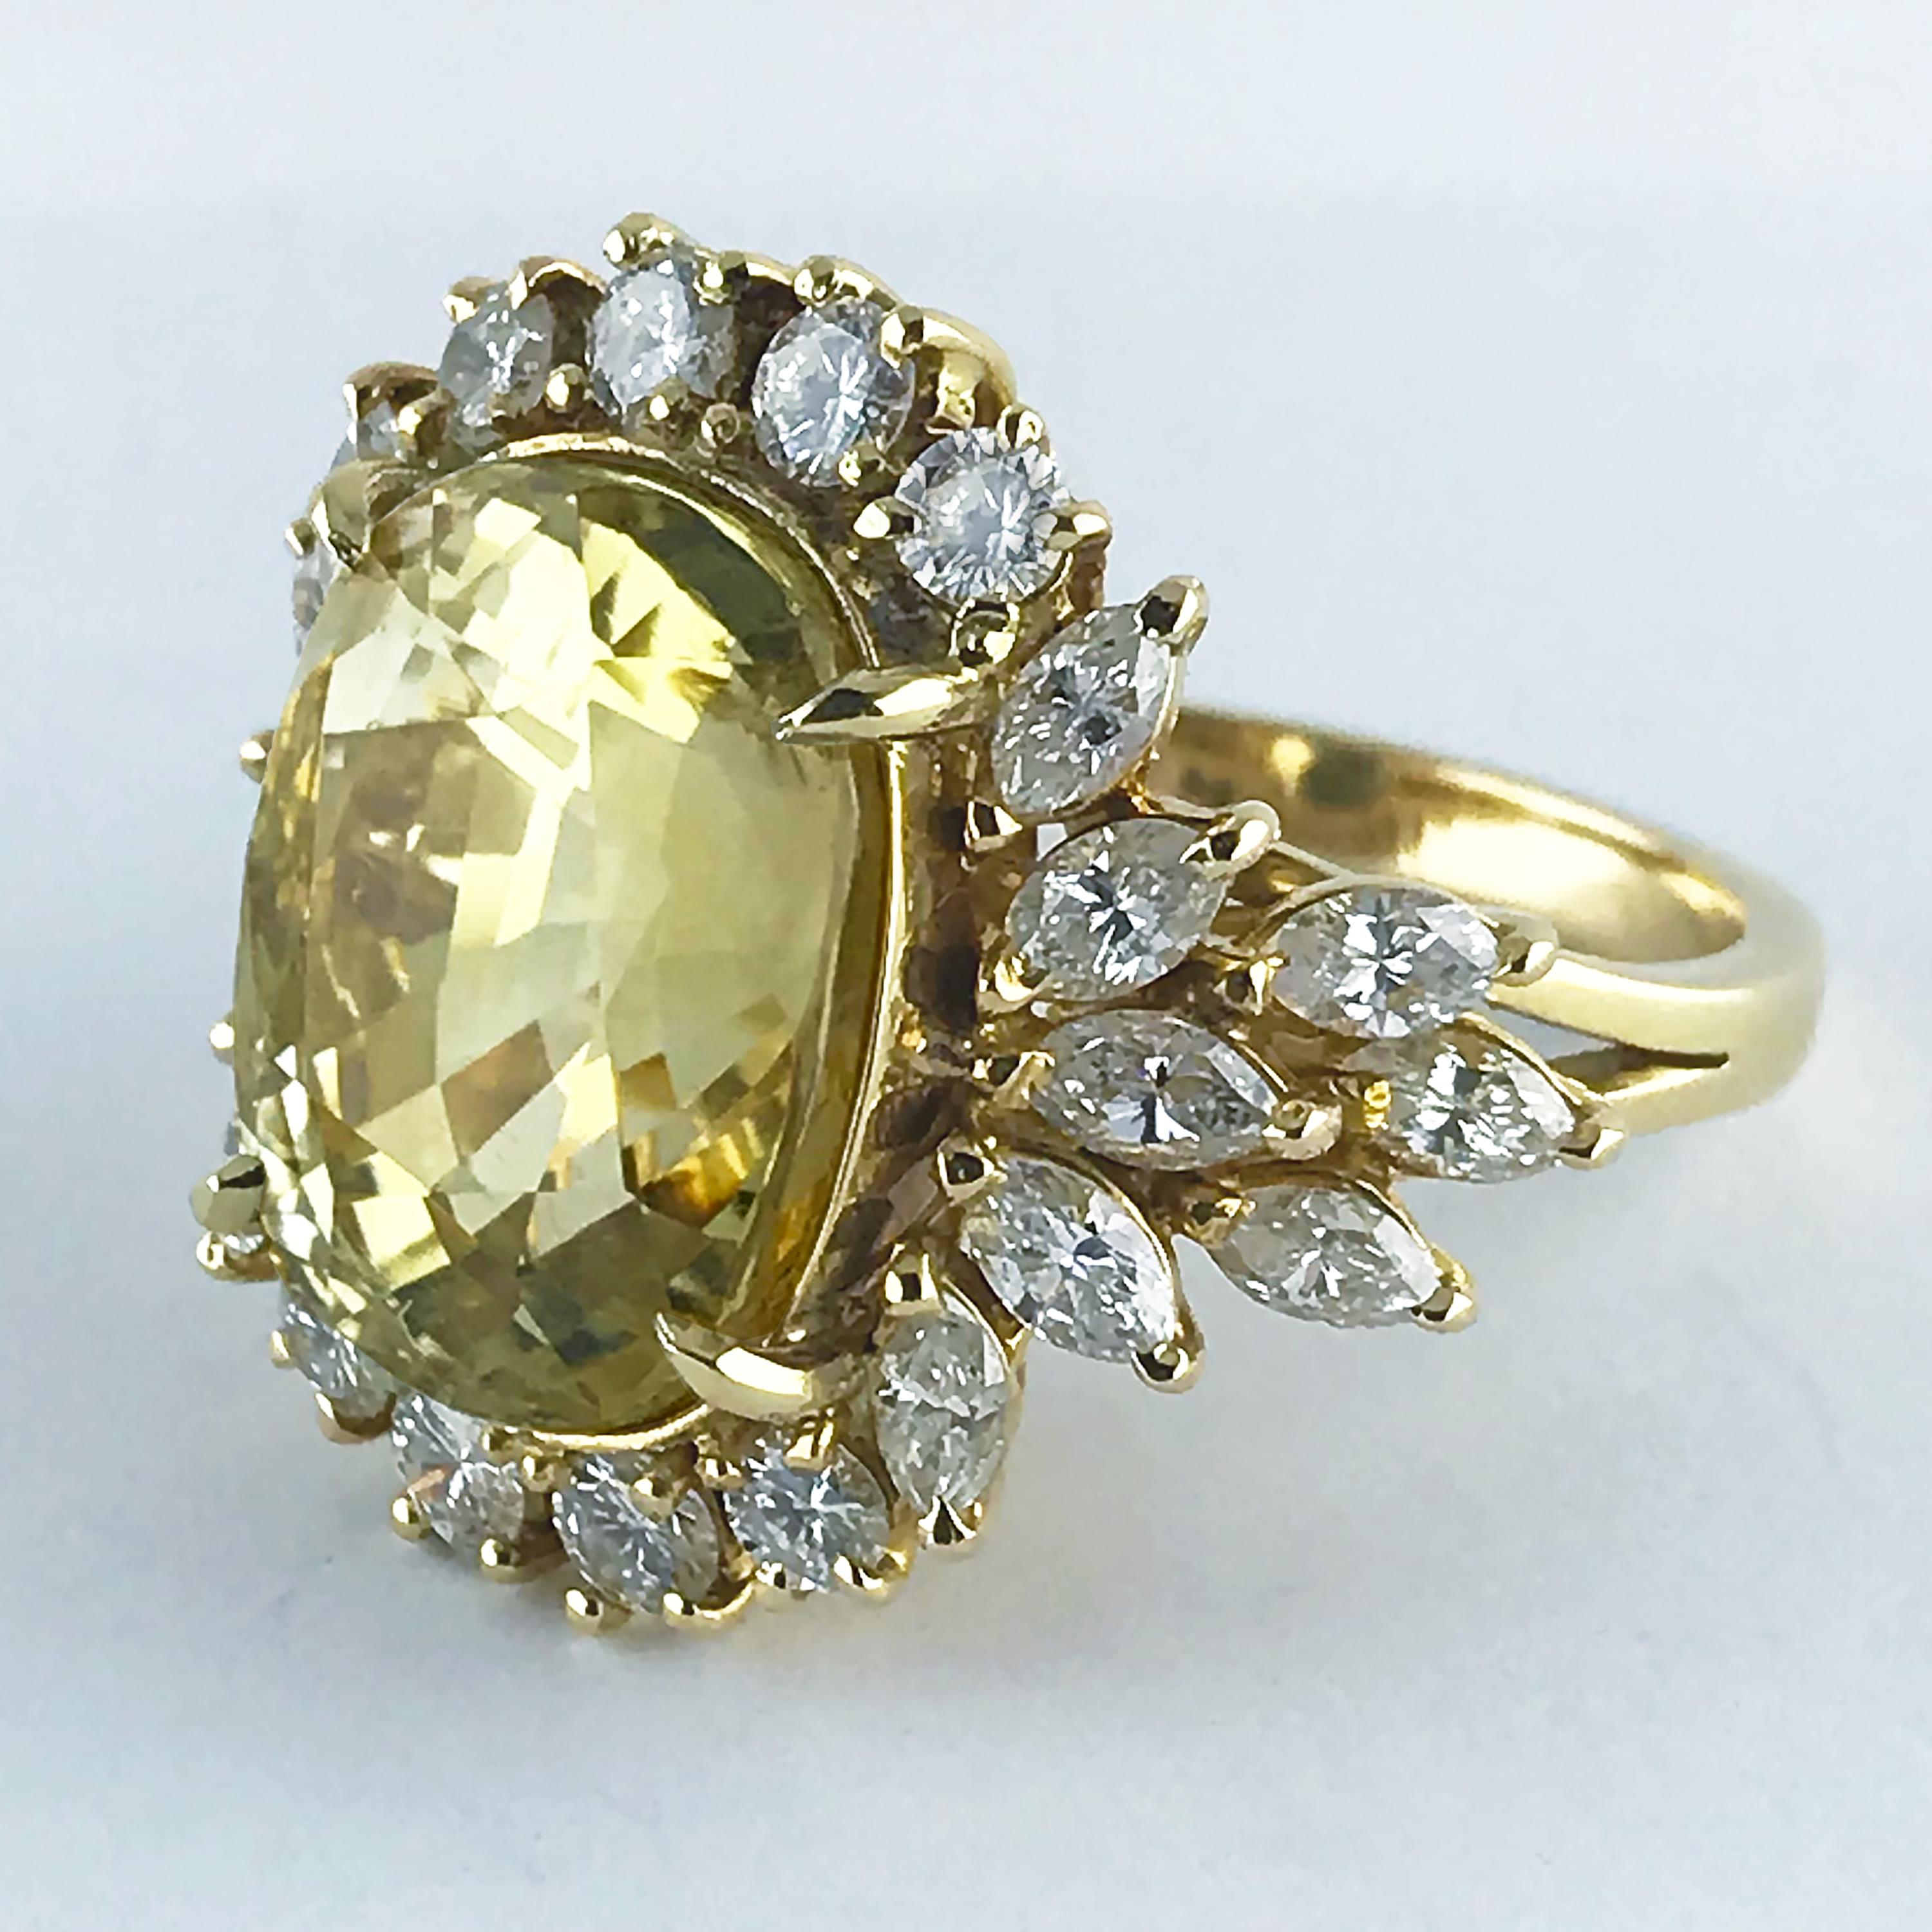 Vintage ring with a large rare natural, untreated, yellow sapphire, handmade in England, circa 1960.

Central Ceylon (Sri Lanka) yellow sapphire, cushion cut, weighing 16.39ct, certified, natural untreated colour. 

The sapphire surrounded by